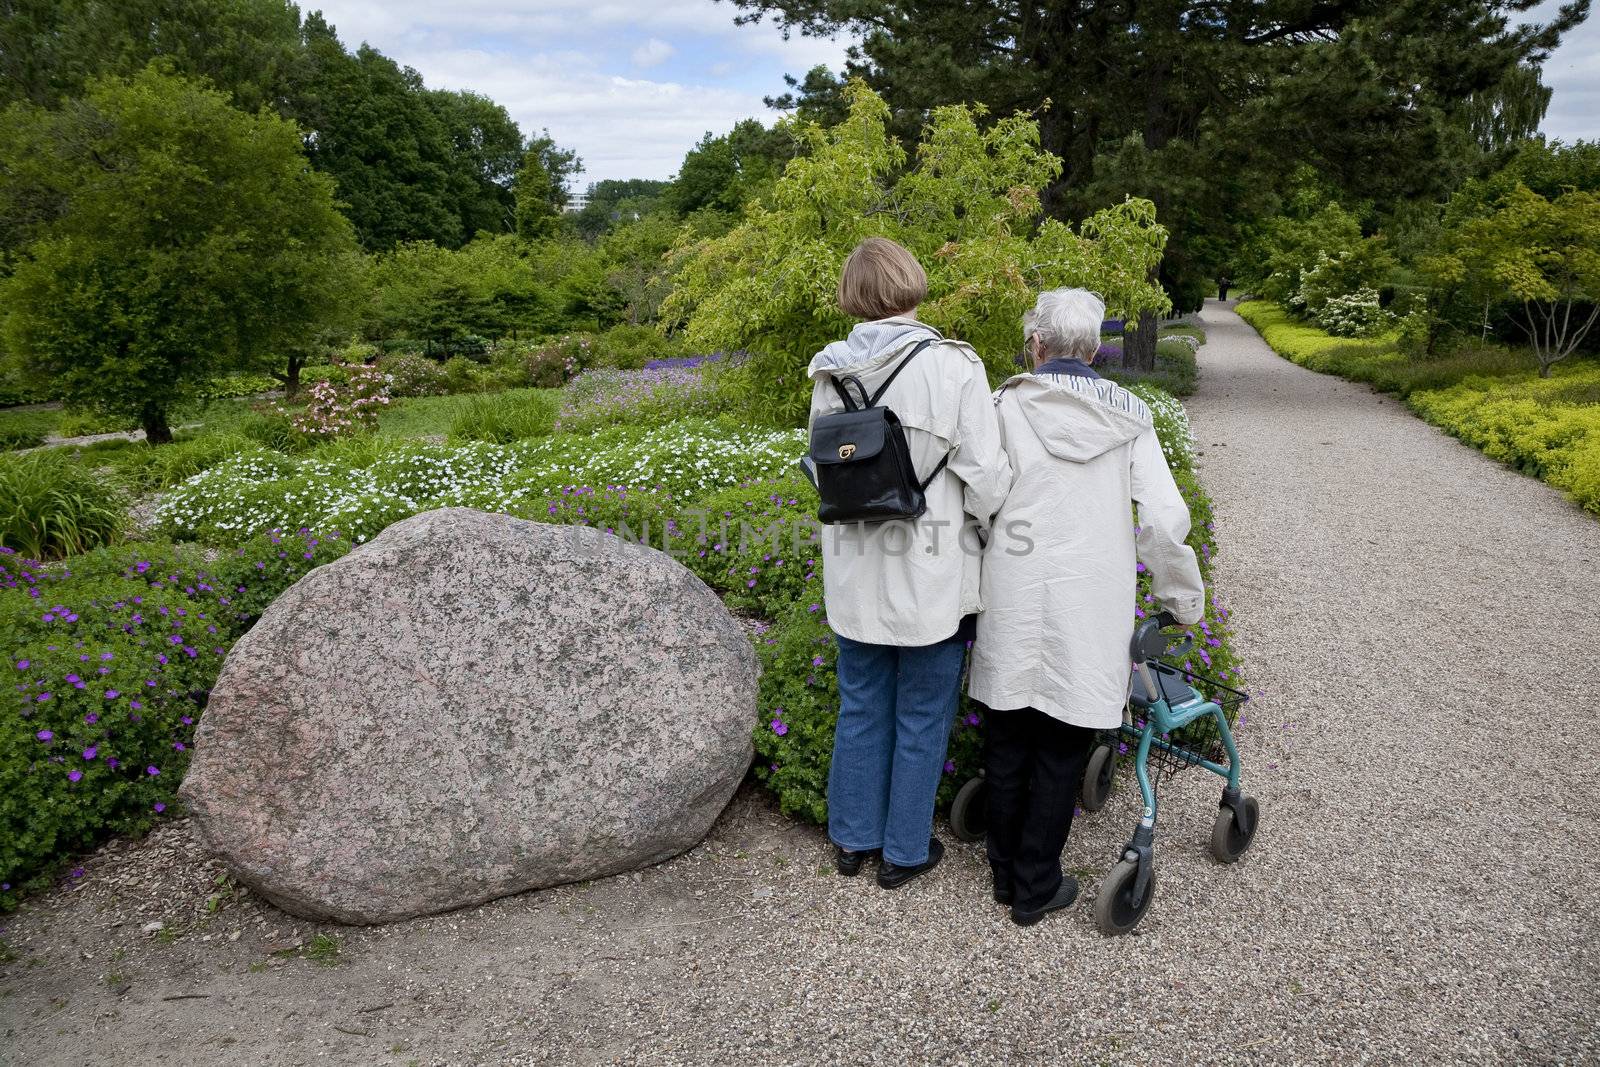 Two generations looking at flowers in Culture Botanical Garden Odense, Denmark.